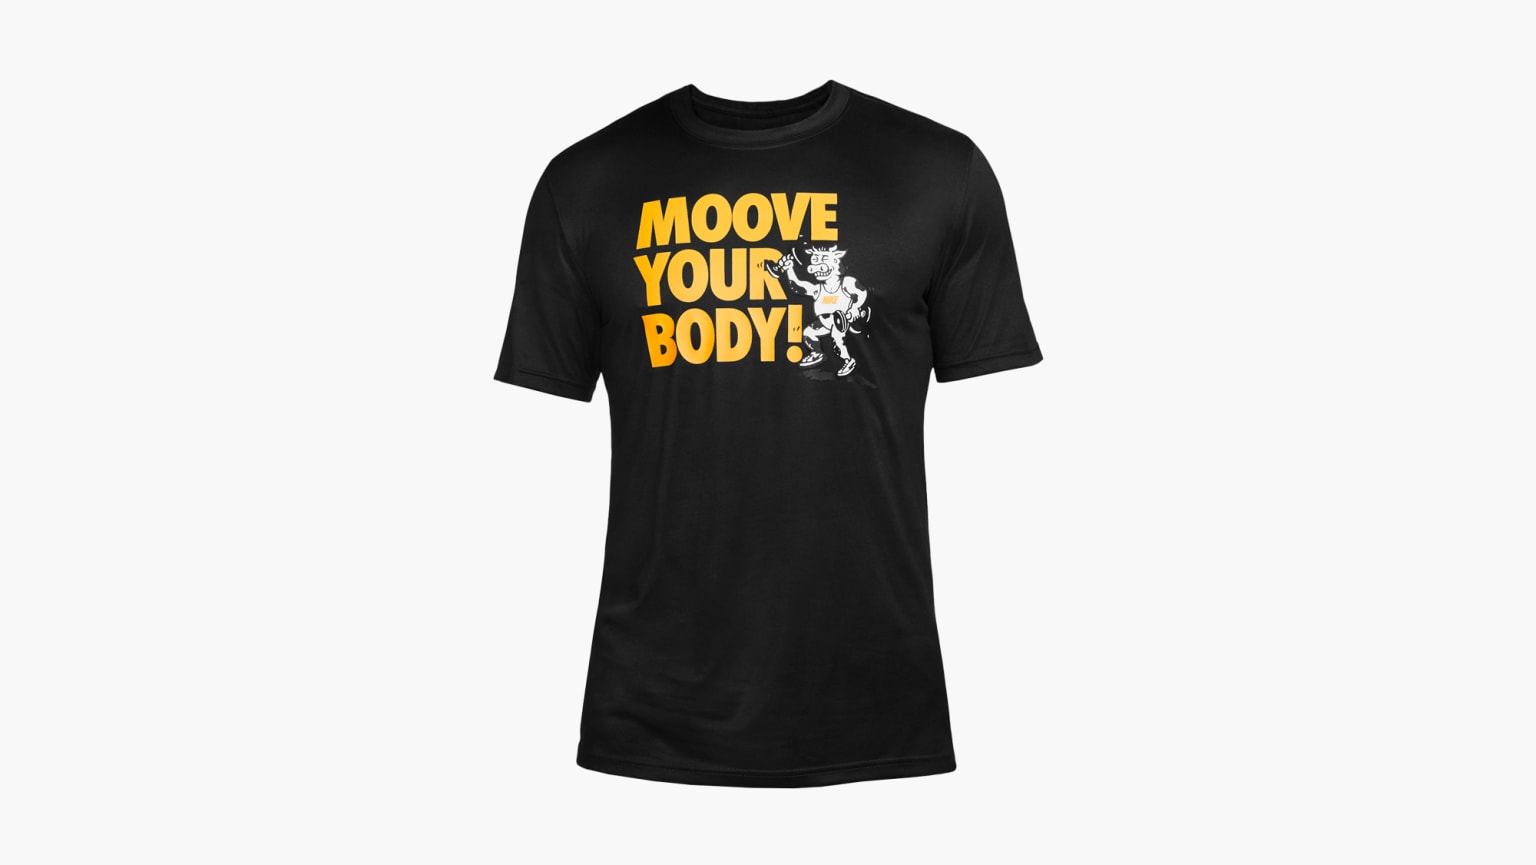 Nike Dri-FIT “Moove Your Body” Training Tee - Men\'s - Black | Rogue Fitness